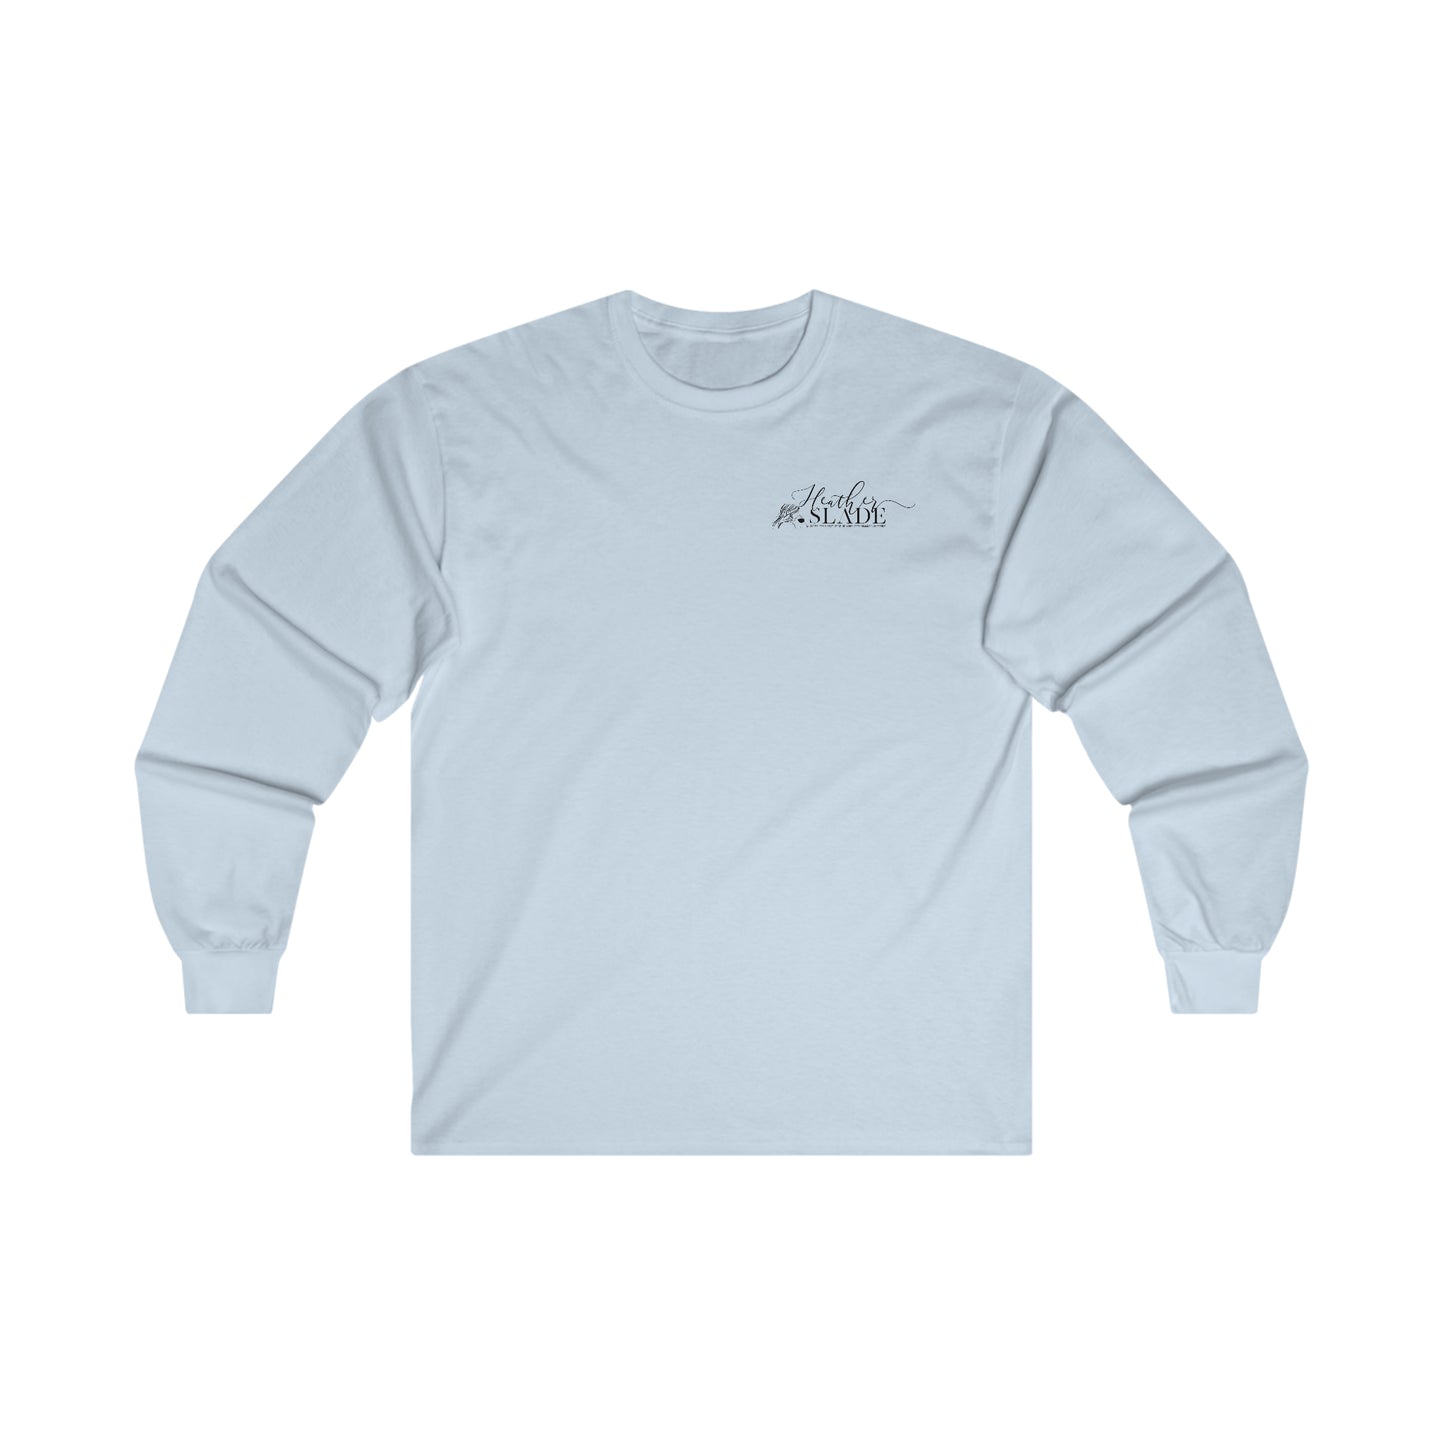 K19 Security Solutions Team One Ultra Cotton Long Sleeve Tee